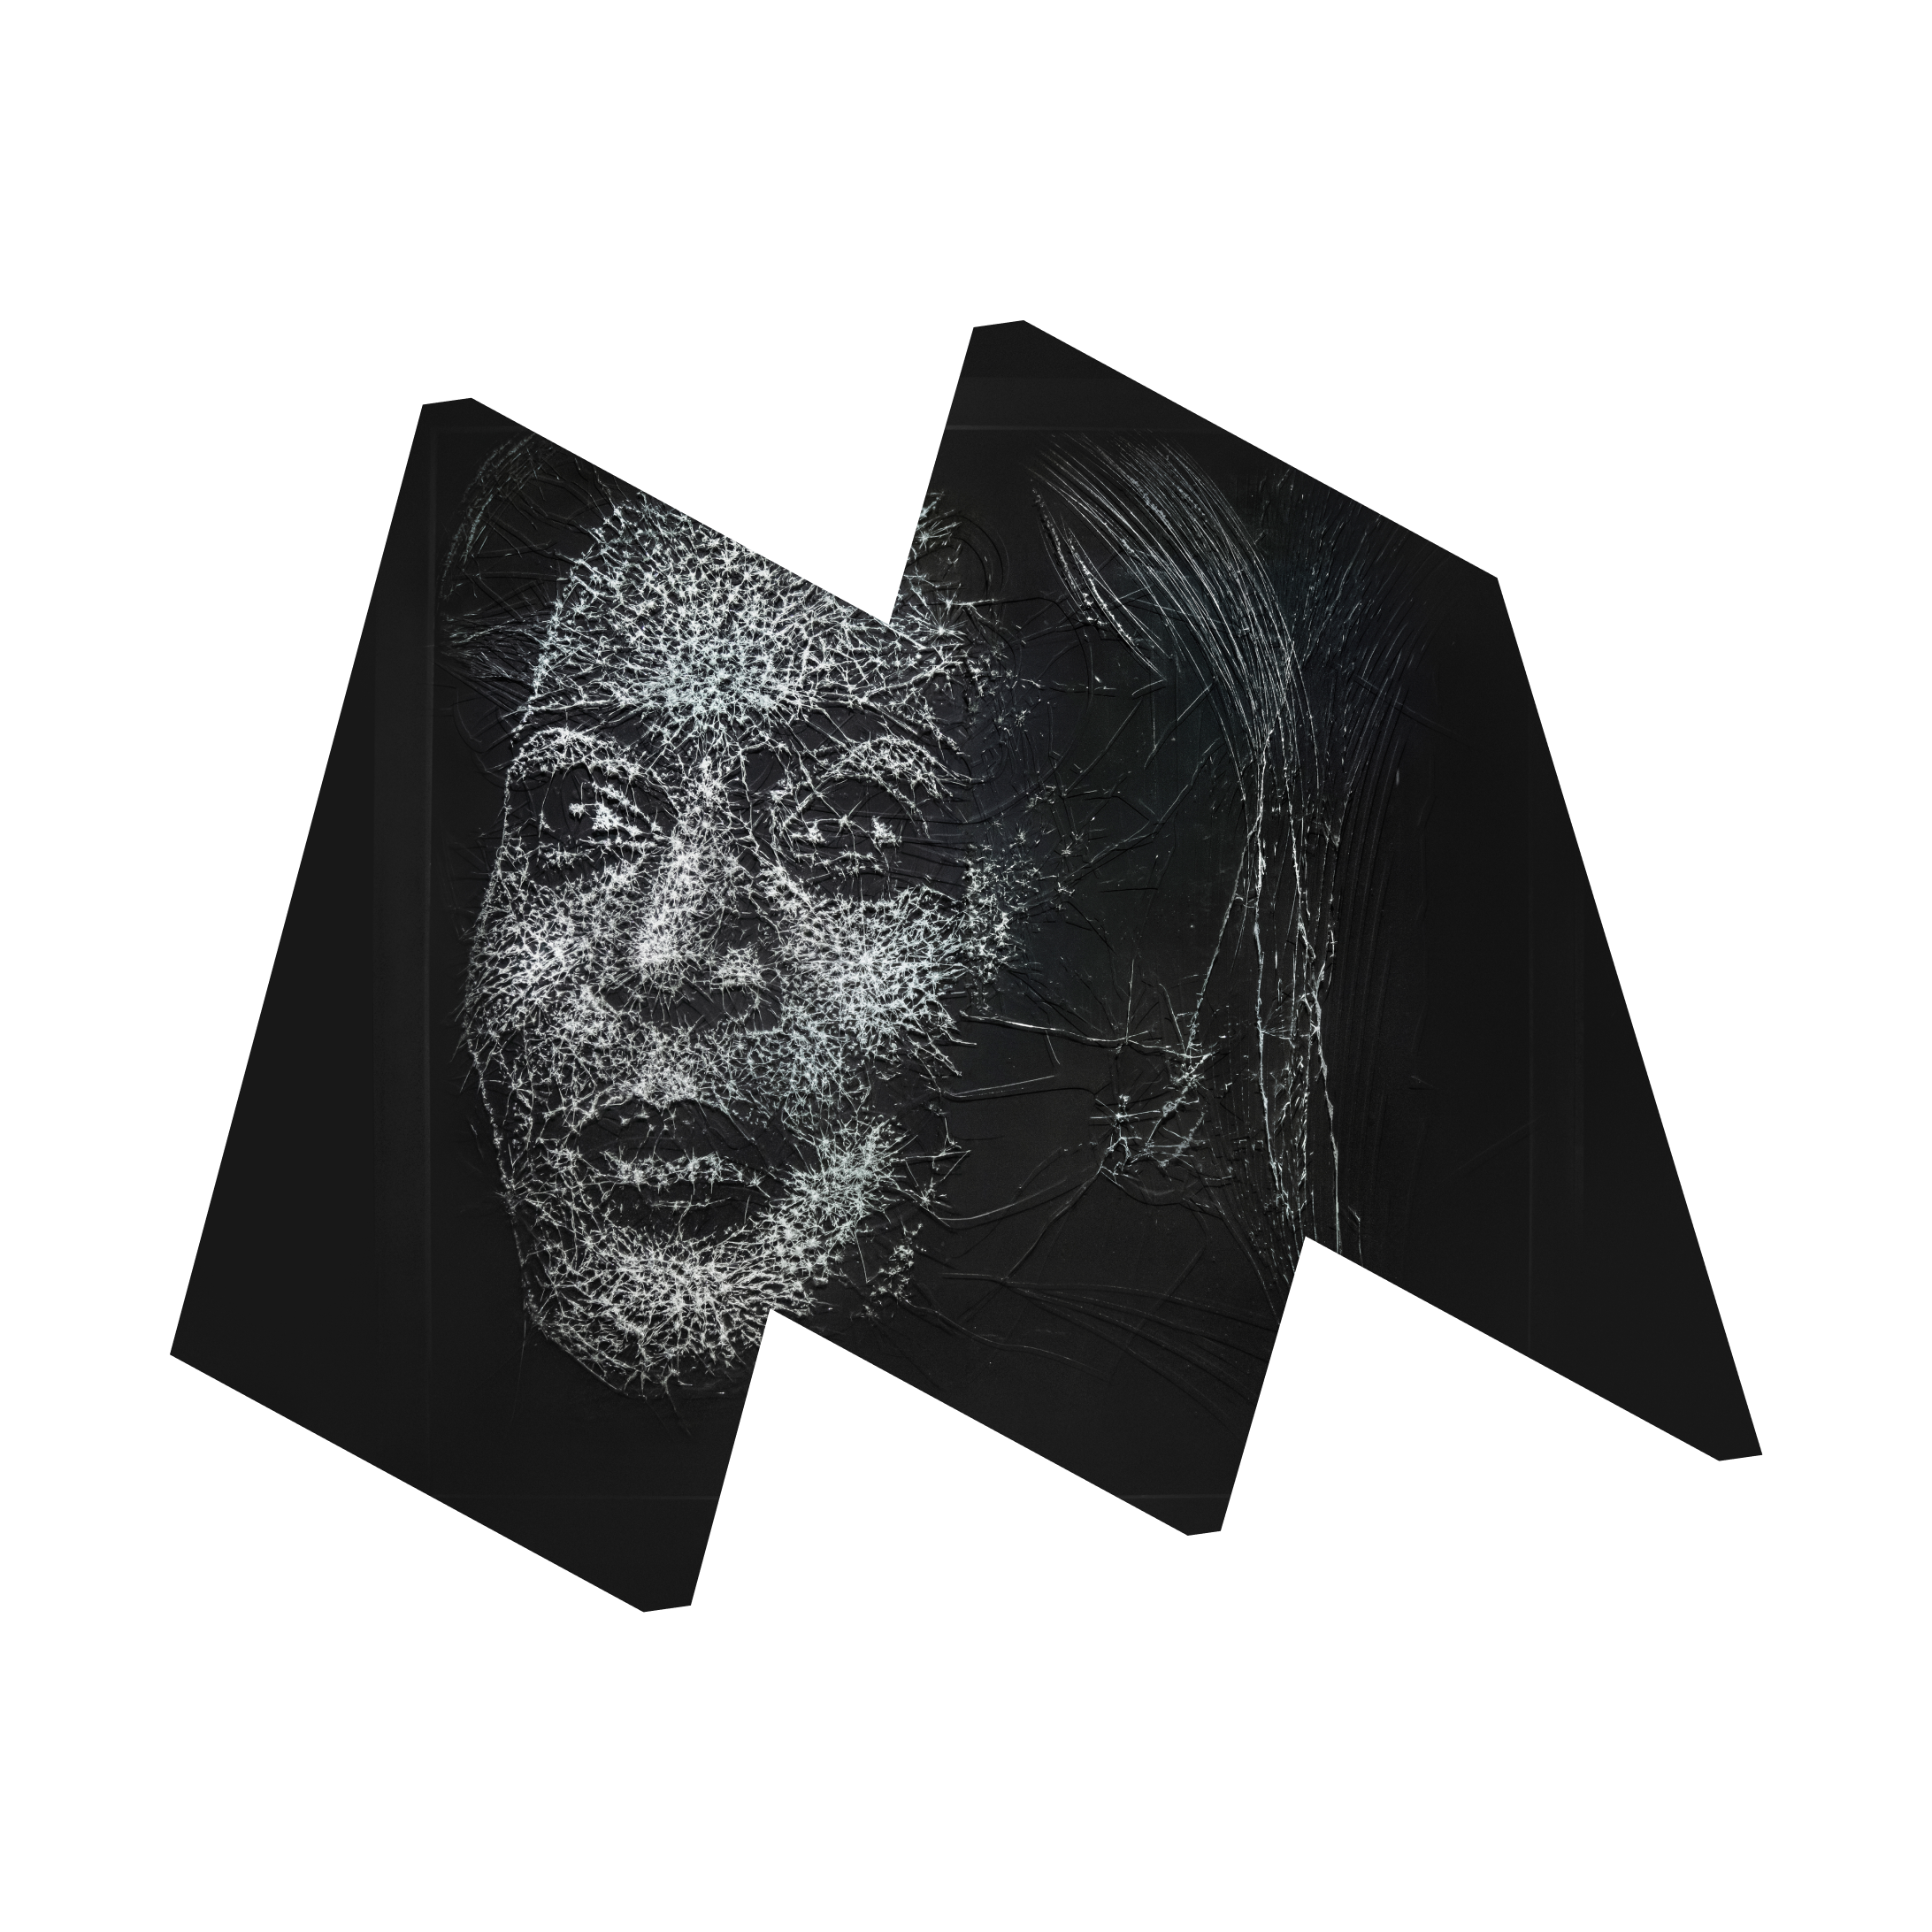 In "M" frame, image of portrait of Vice President Kamala Harris made from shattered glass.